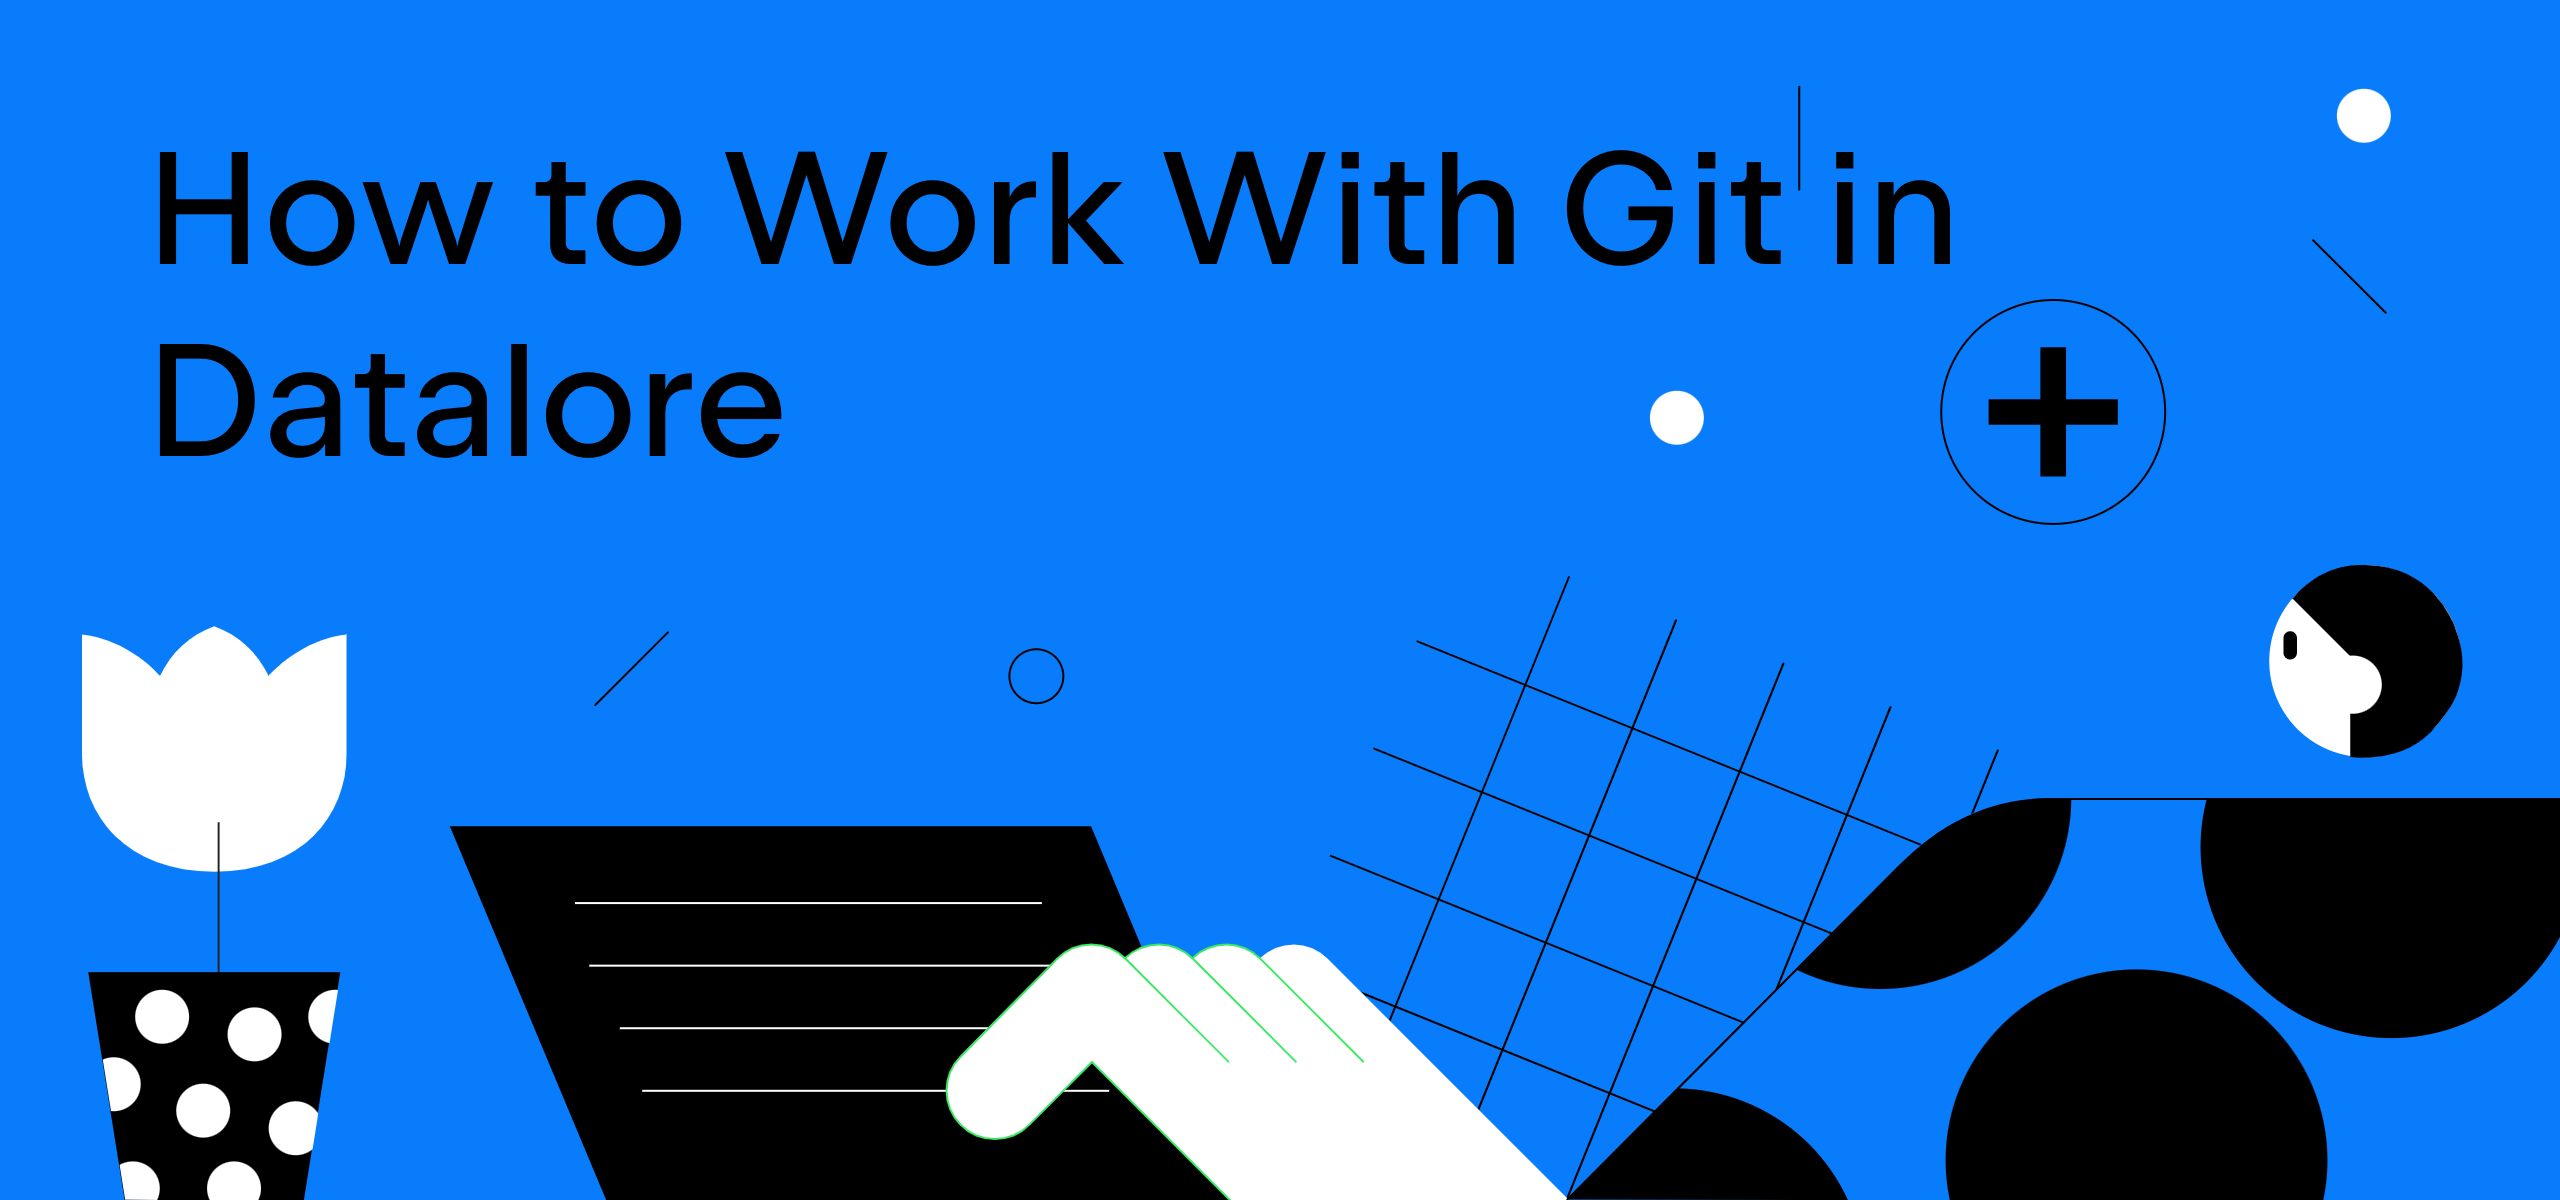 How to Work With Git in Datalore